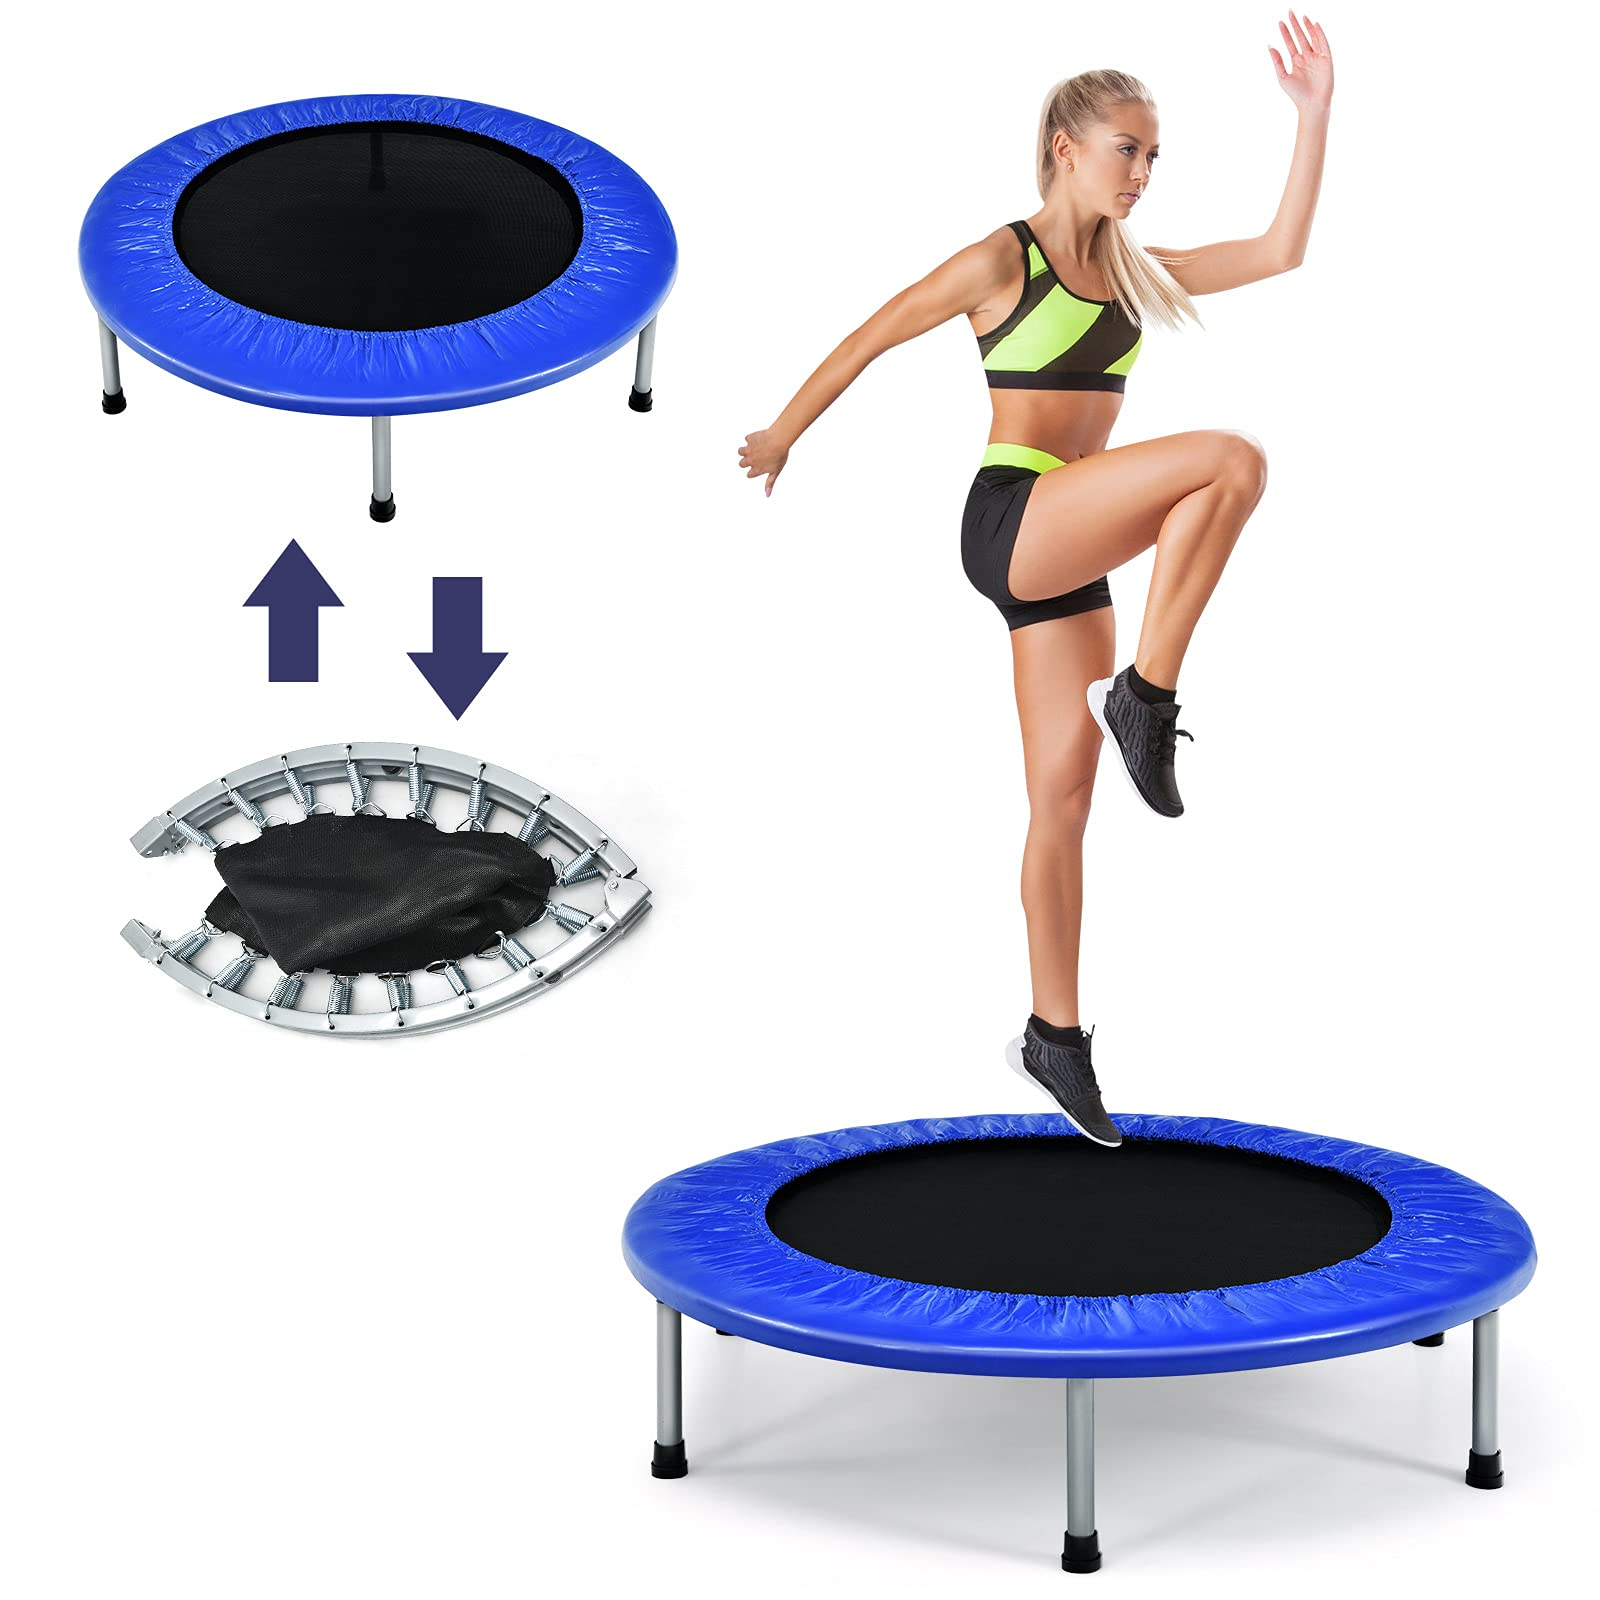 Giantex Folding Mini Trampoline, Portable Recreational Fitness Trampoline  for Adults, Kids, Max Load 330lbs, Foldable Indoor Exercise Rebounder